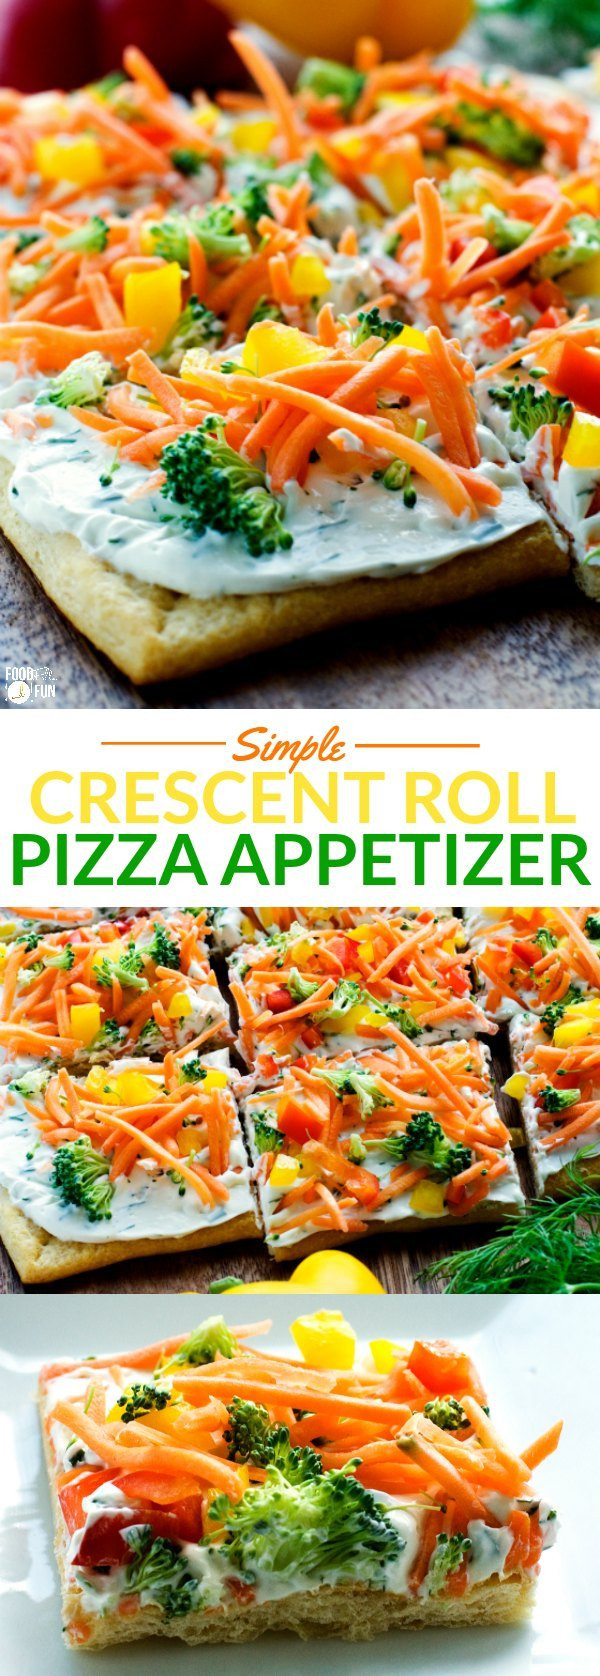 Pizza Appetizers Crescent Rolls
 Simple Crescent Roll Pizza Appetizer • Food Folks and Fun